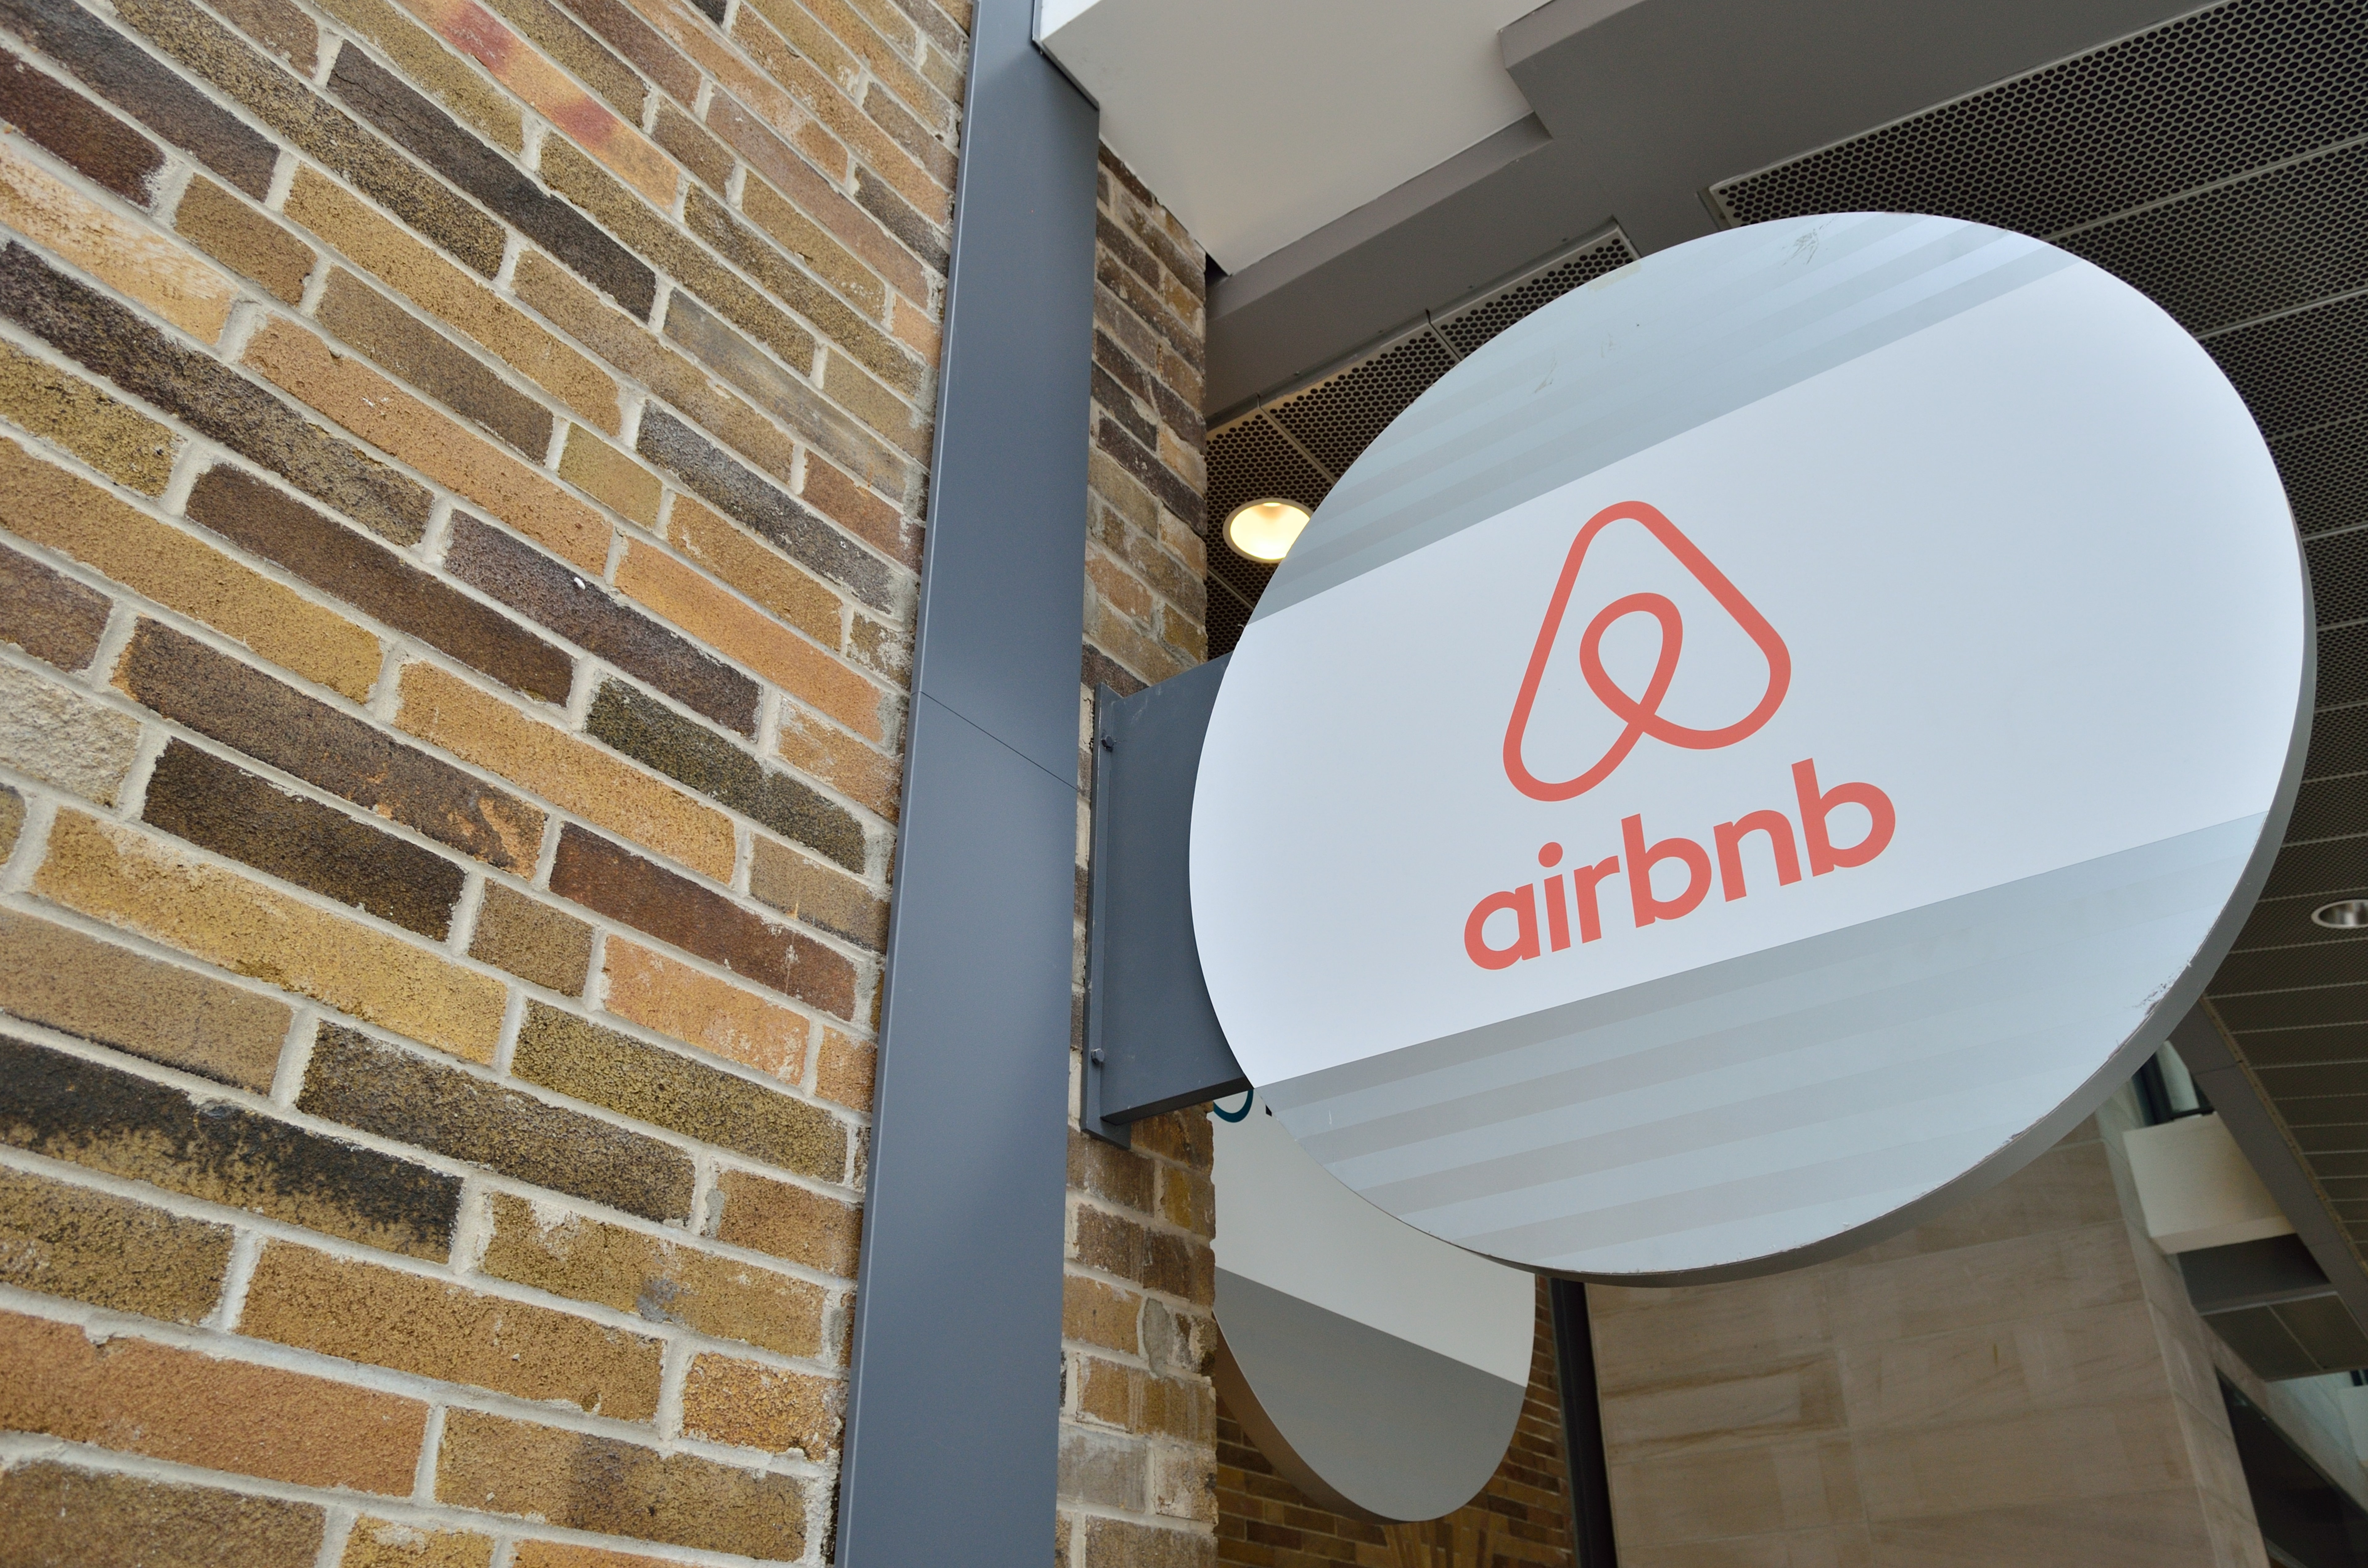 Airbnb Gets $1B Investment From Silver Lake, Sixth Street Partners